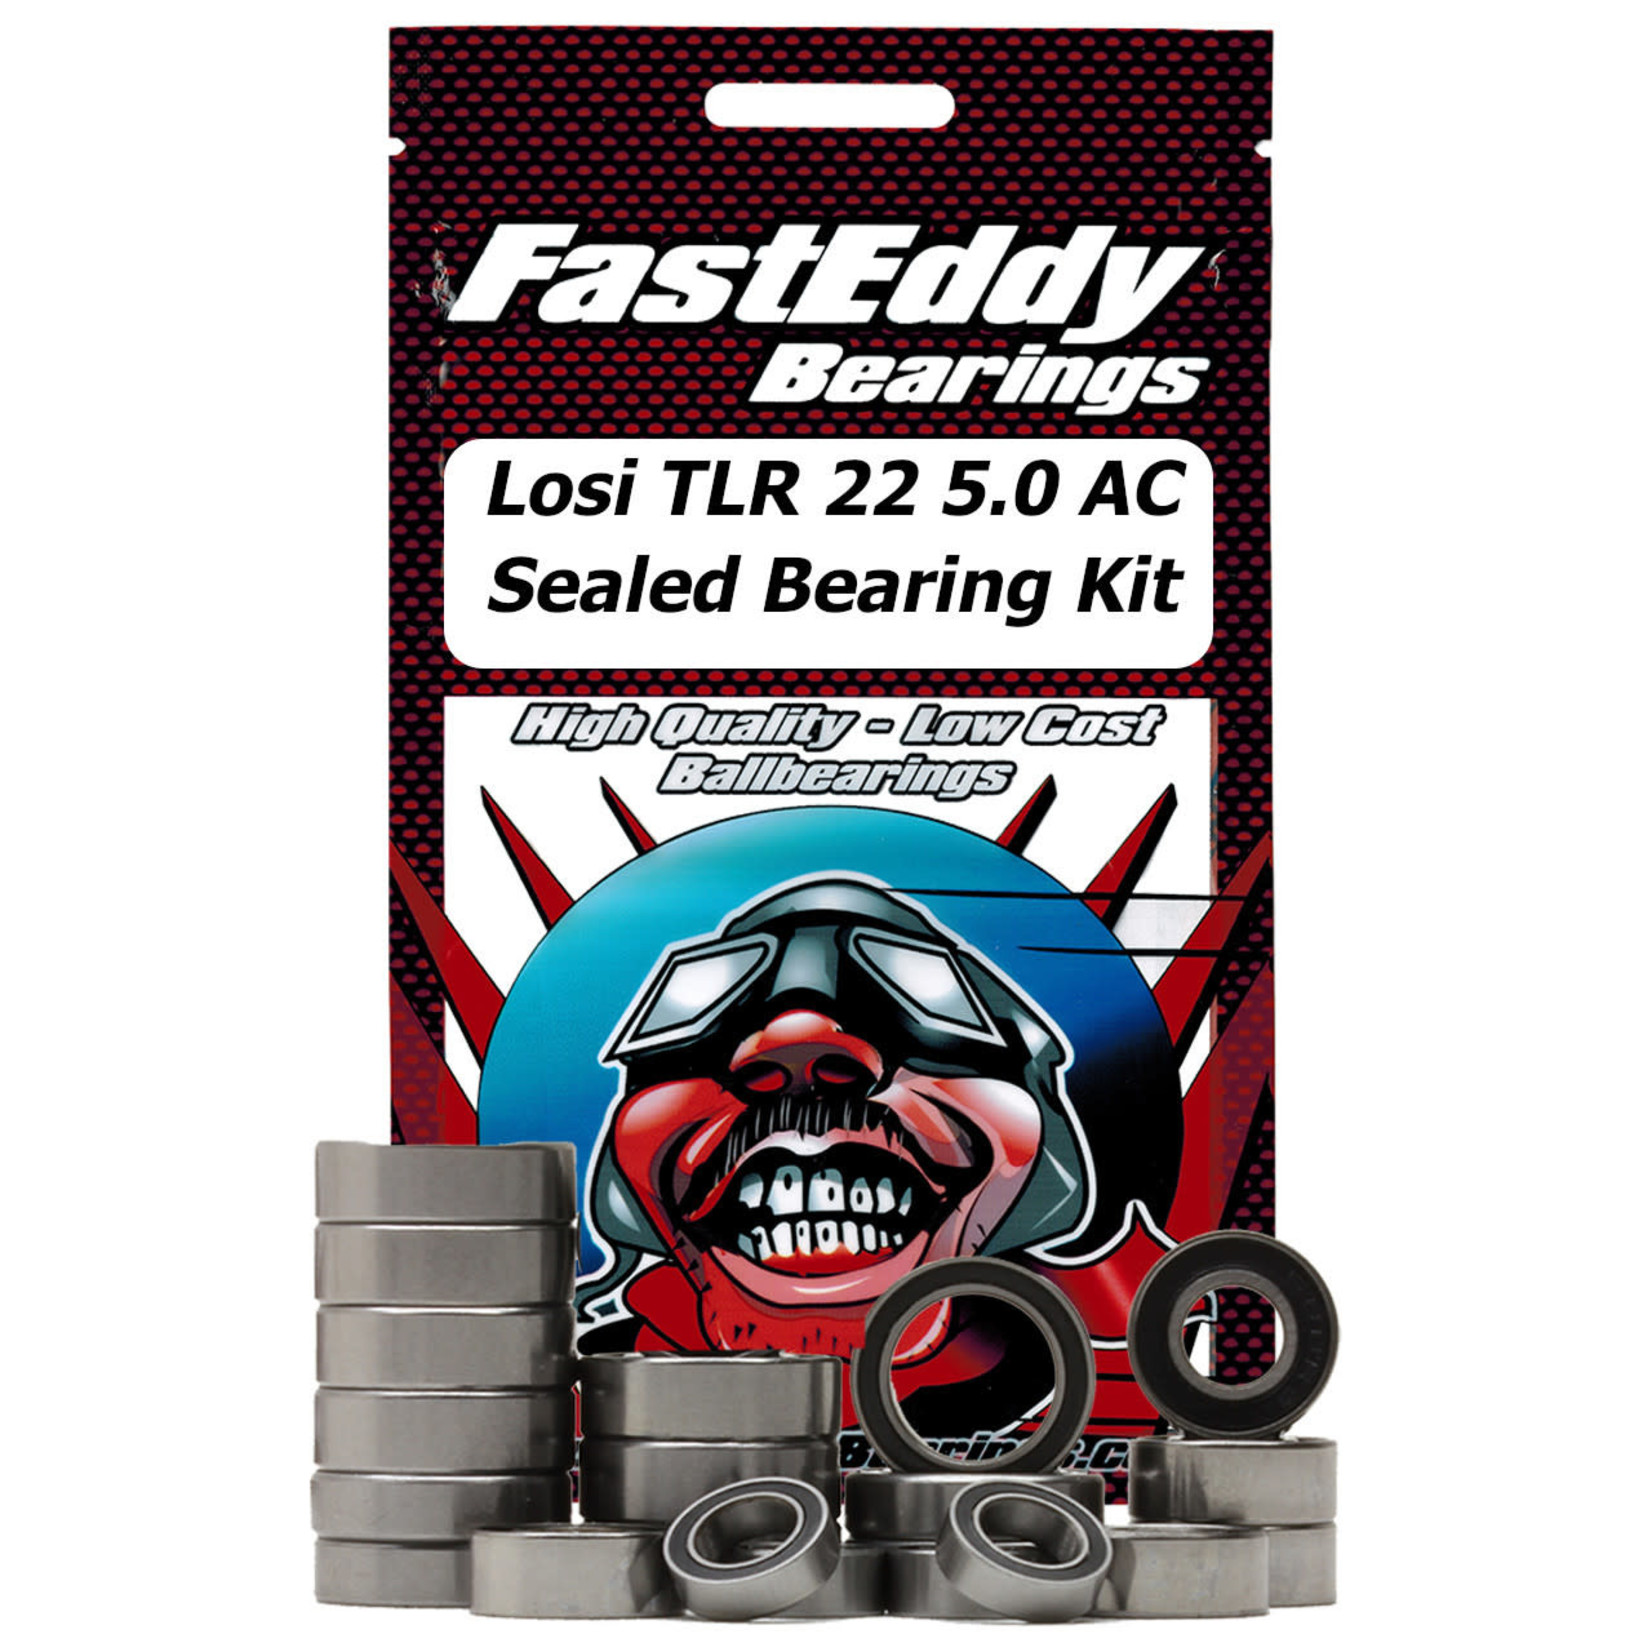 FastEddy FastEddy Losi TLR 22 5.0 AC Sealed Bearing Kit #TFE8093